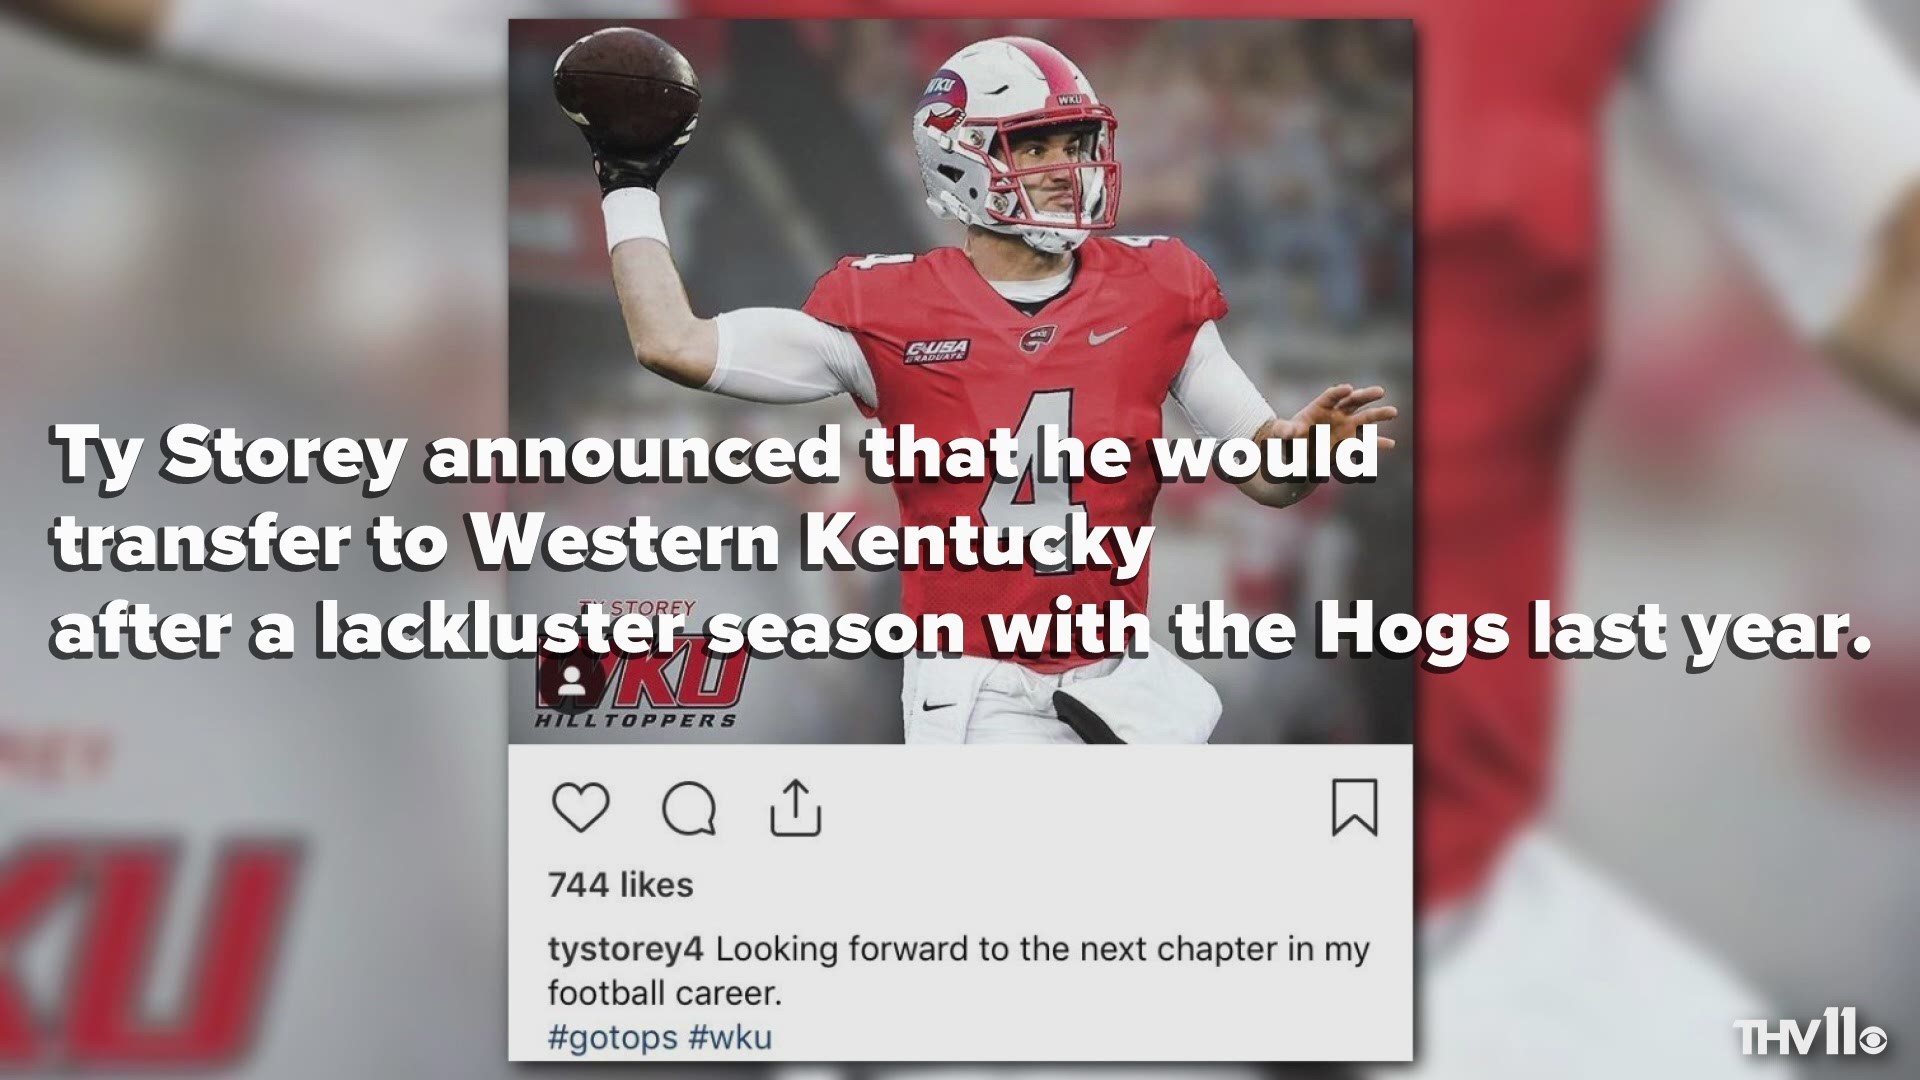 Ty Storey announced on Instagram that he will transfer to Western Kentucky.